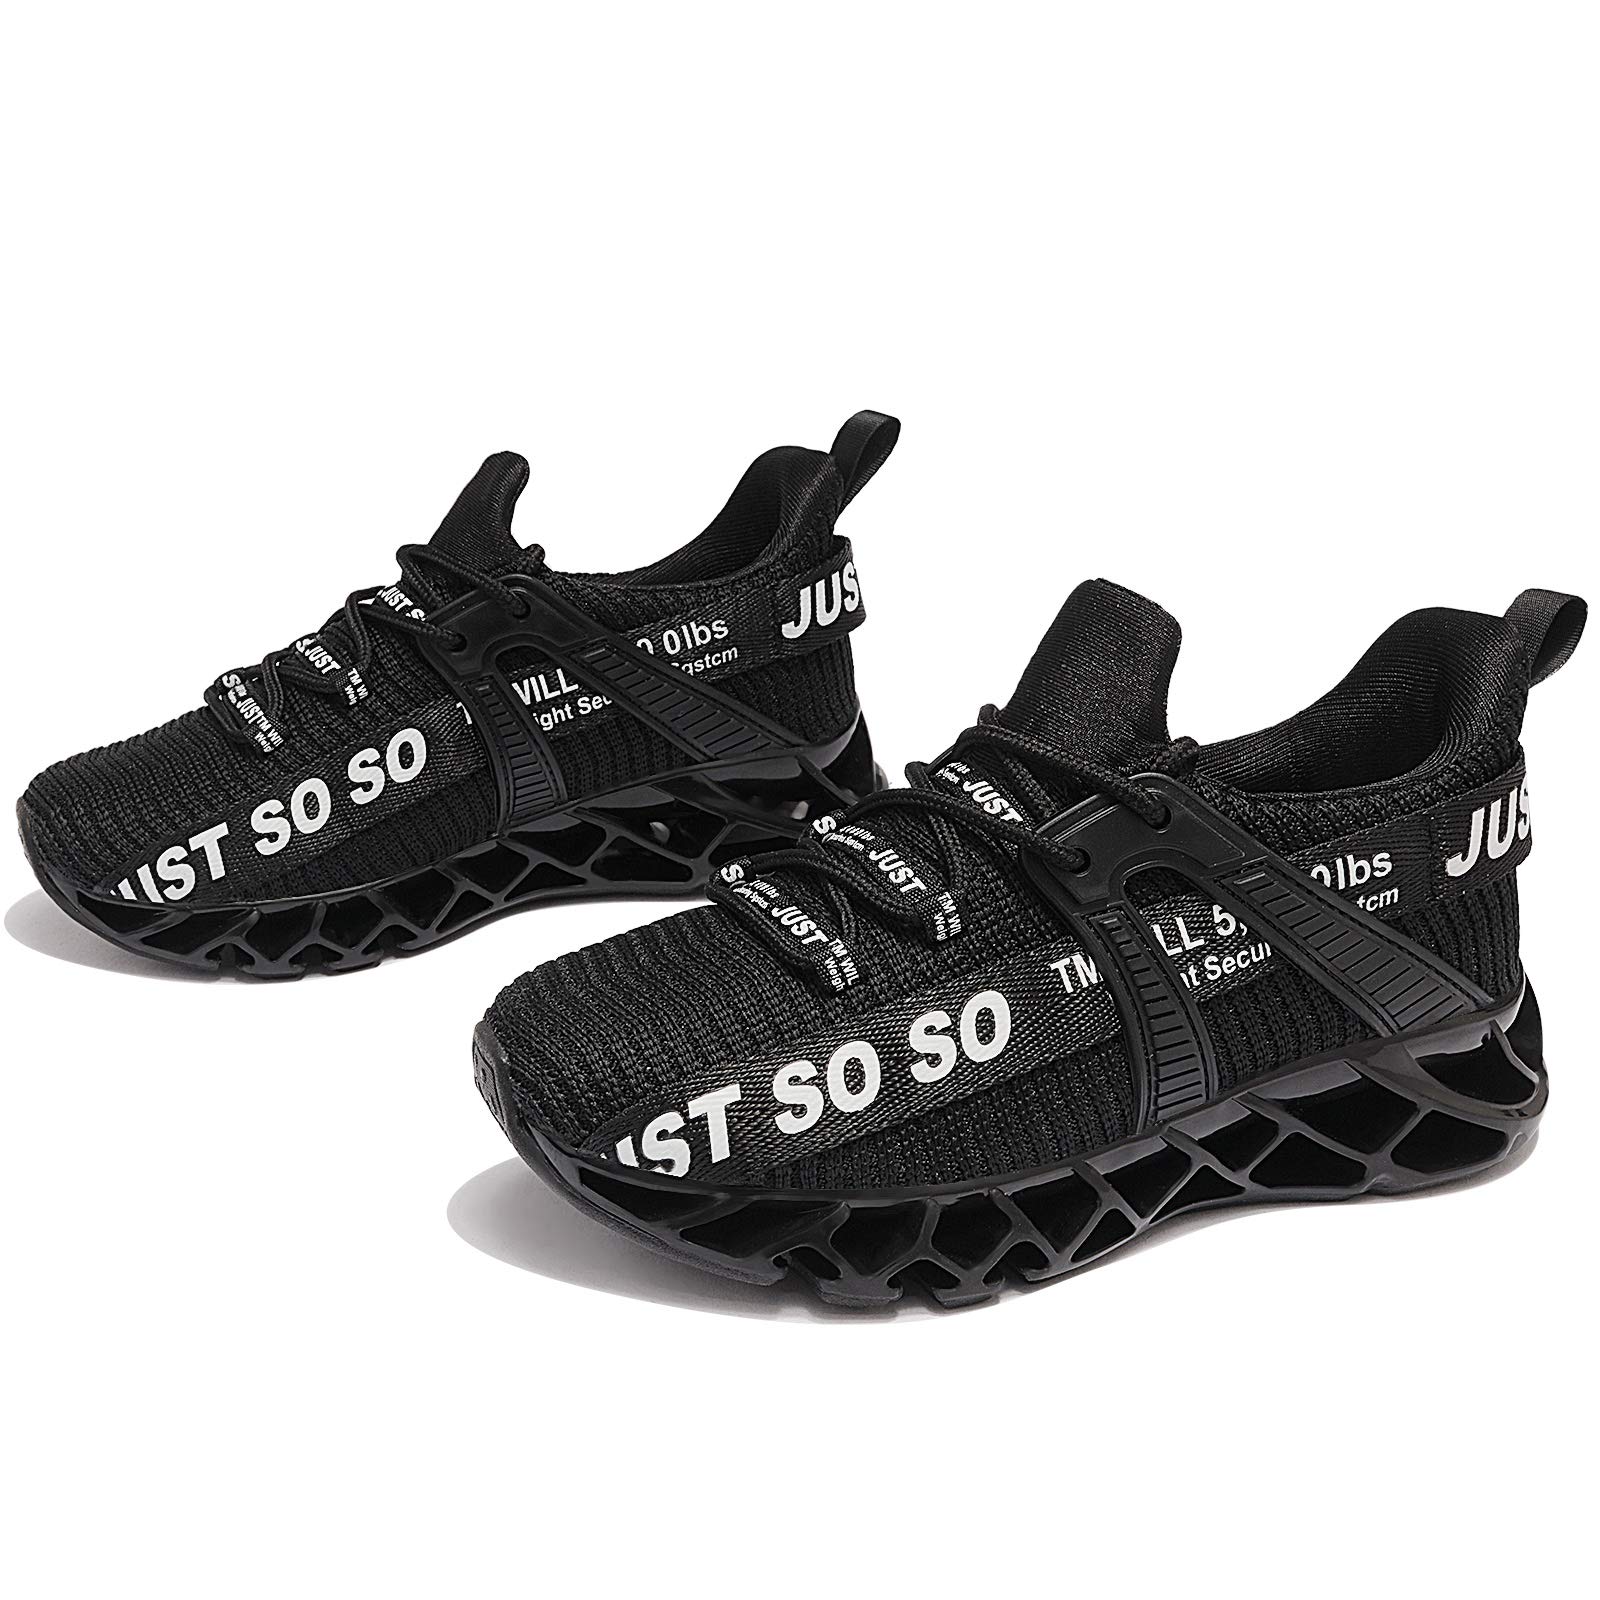 UMYOGO Boys Girls Shoes Tennis Running Lightweight Breathable Sneakers for Kids